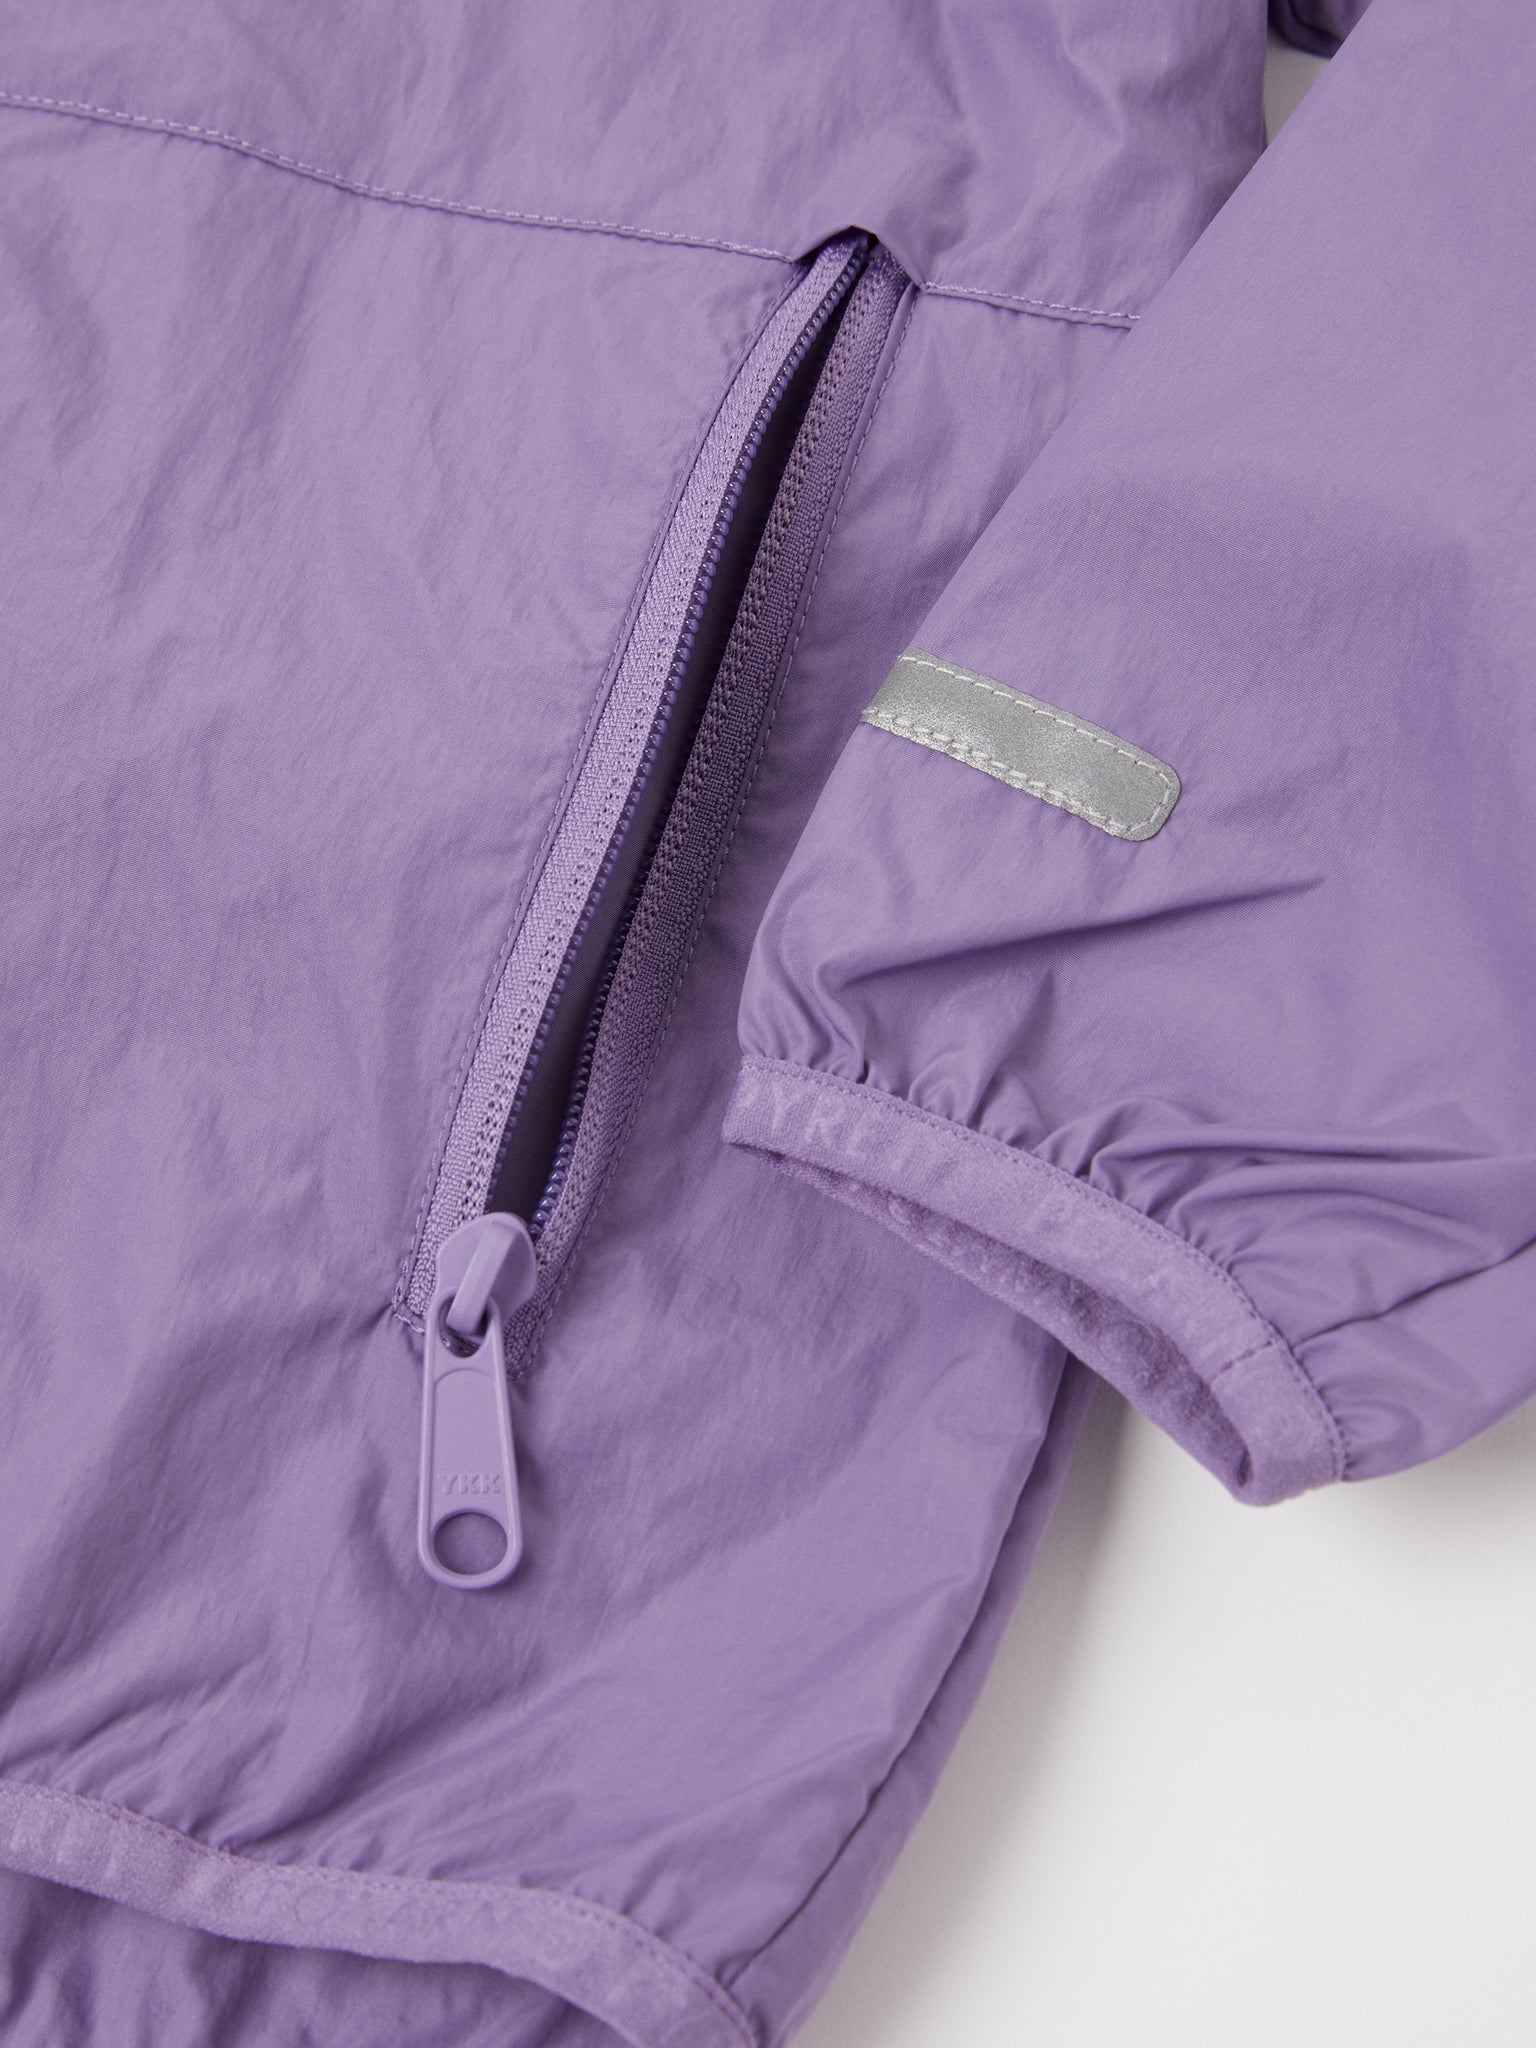 Waterproof Packable Kids Rain Mac from the Polarn O. Pyret kidswear collection. Quality kids clothing made to last.